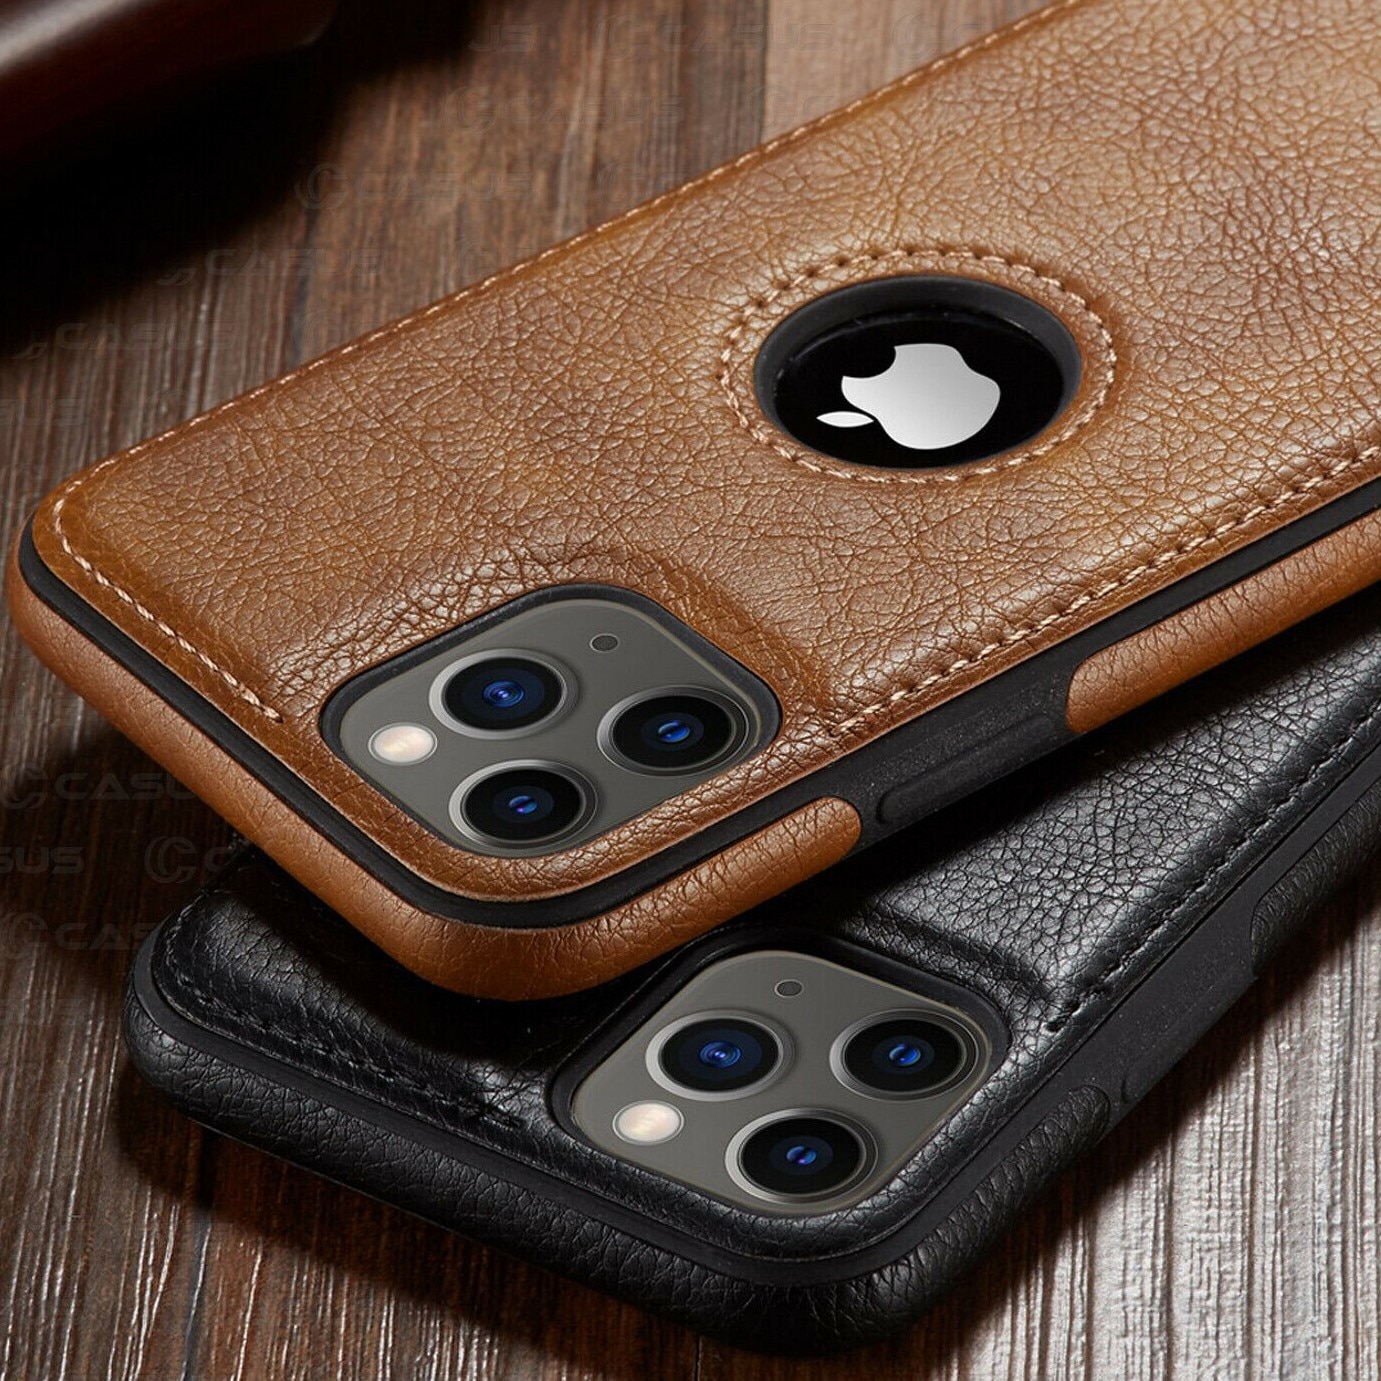 For iPhone 11 11 Pro 11 Pro Max Case Luxury Business Leather Stitching Case Cover for iphone XS Max XR X 8 7 6 6S Plus Case